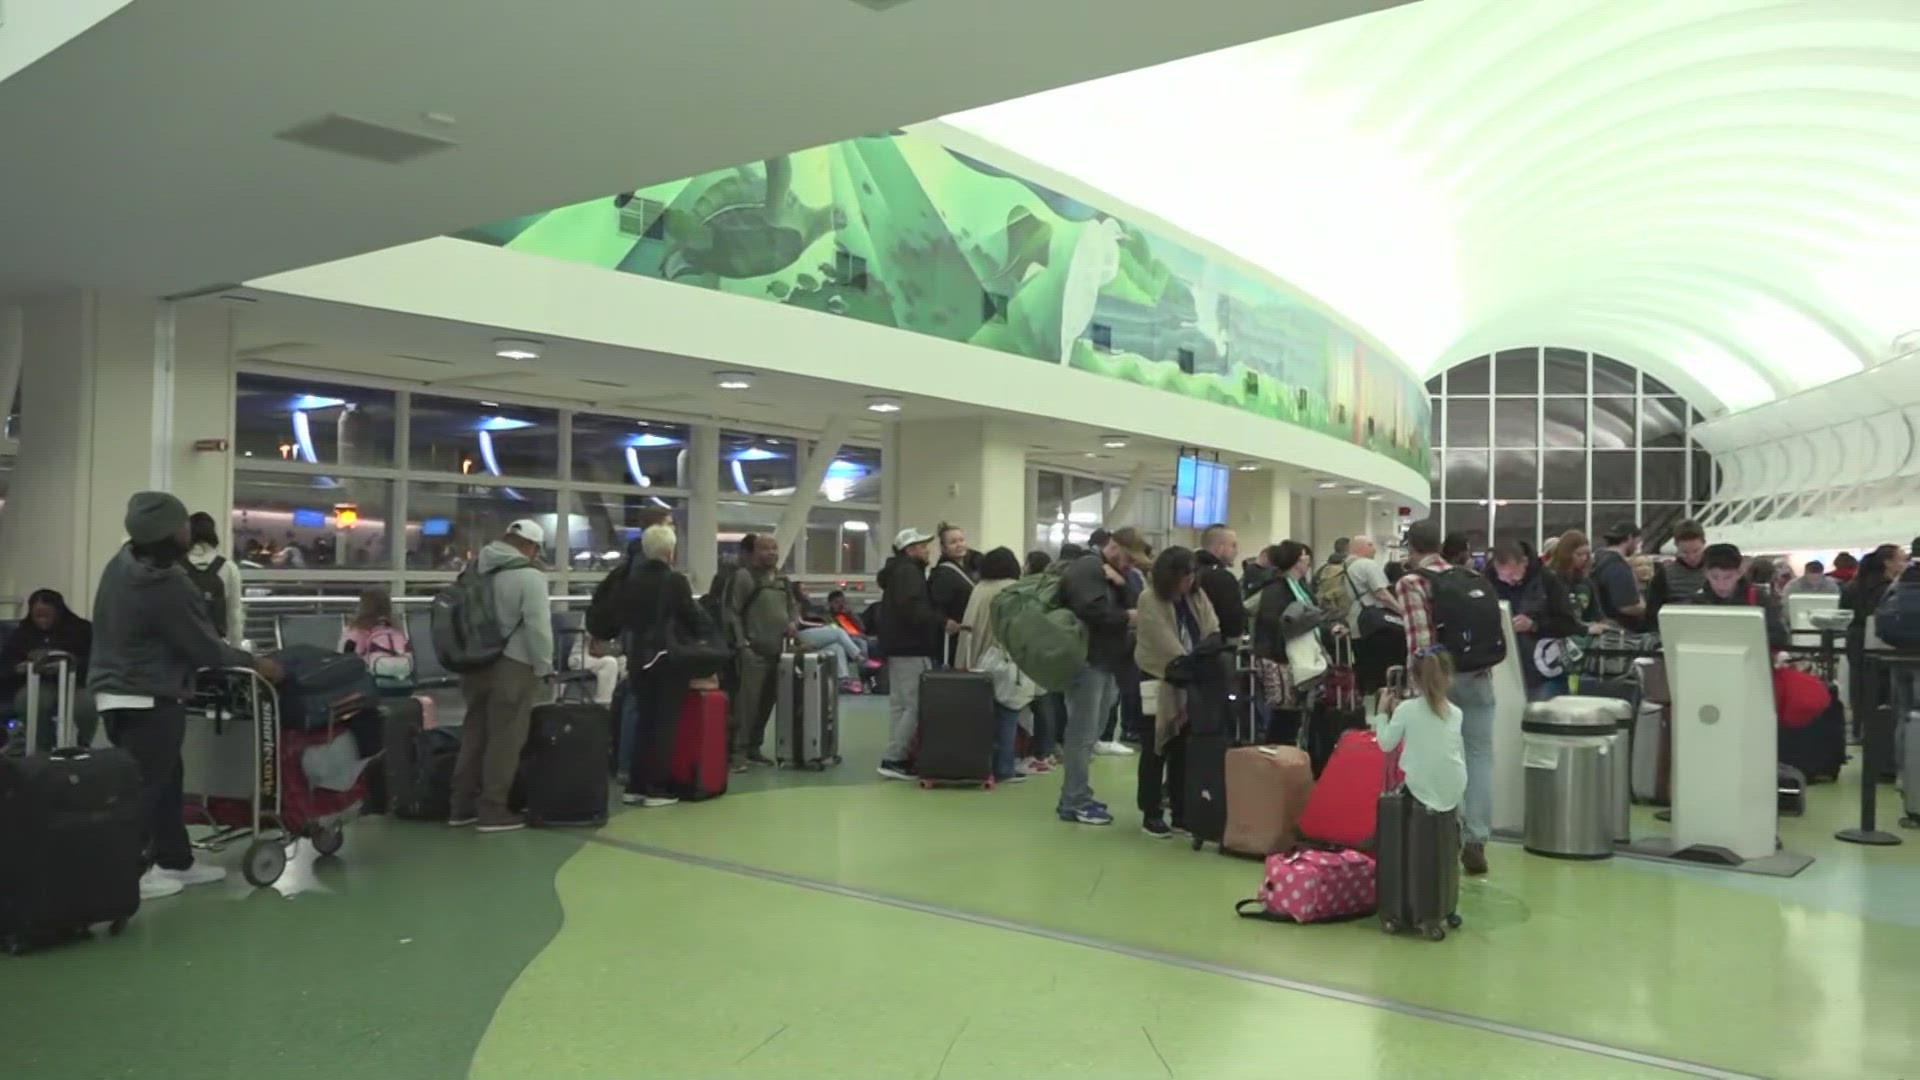 Several airlines had long lines Friday morning at JIA. Passengers First Coast News spoke with say arriving early for your flight is a good idea.